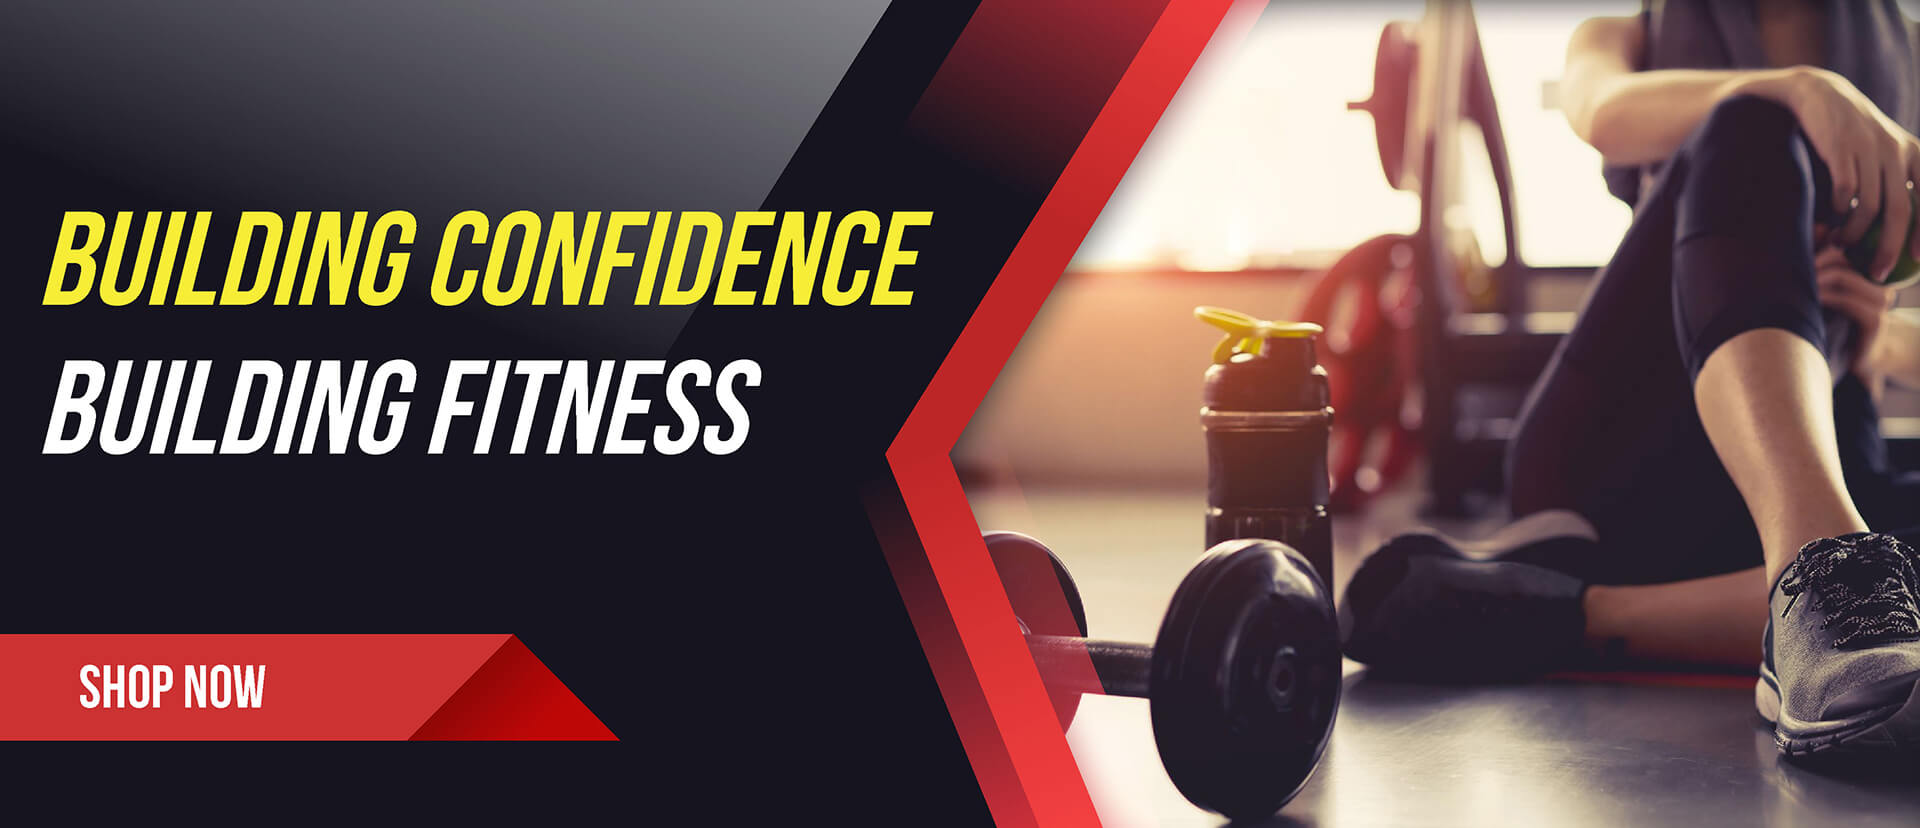 banner6 - BUILD CONFIDENCE